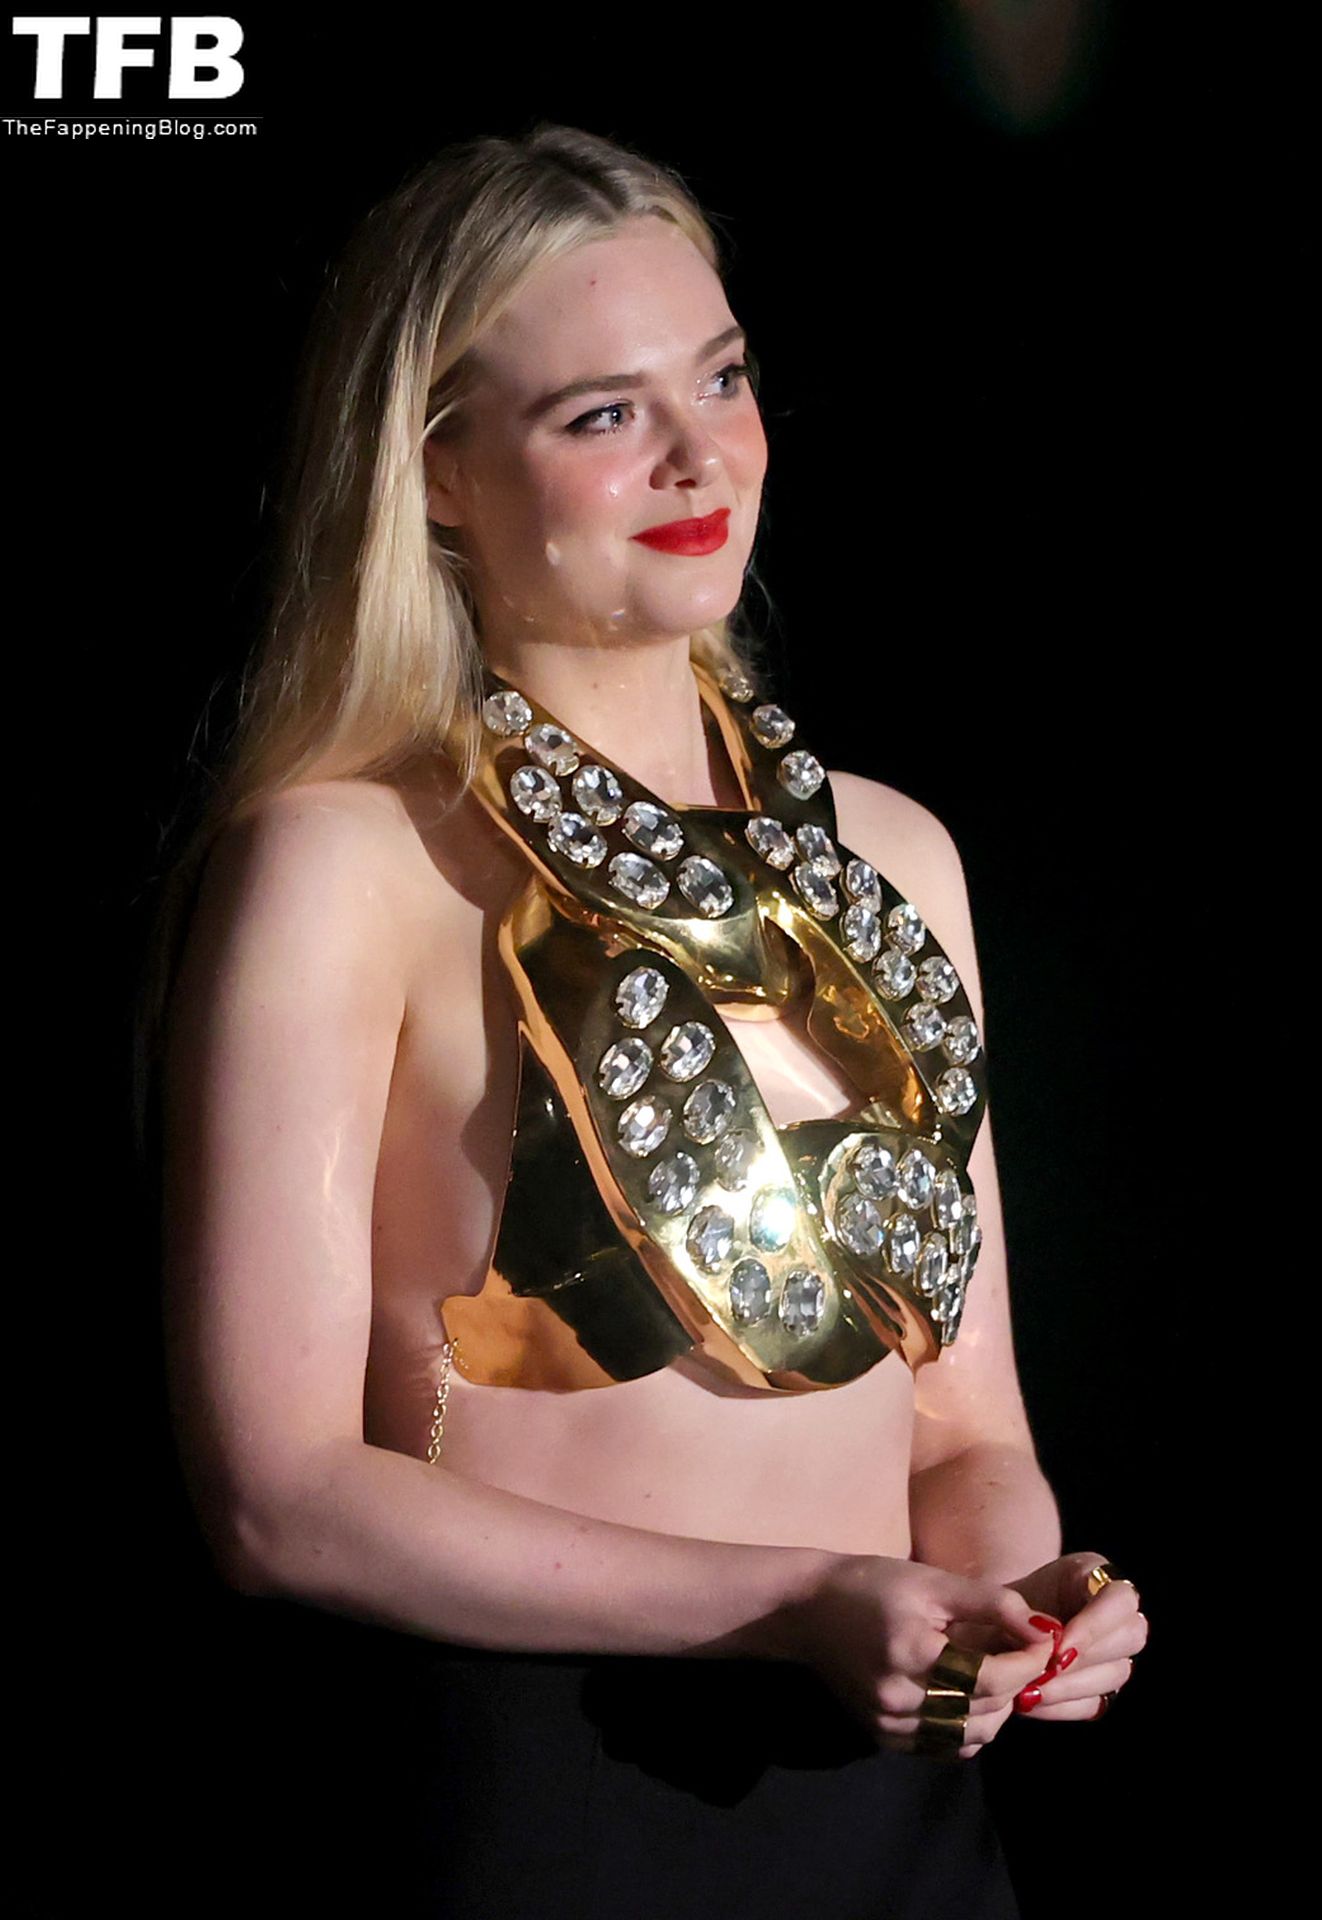 Elle-Fanning-Sexy-Braless-The-Fappening-Blog-45.jpg